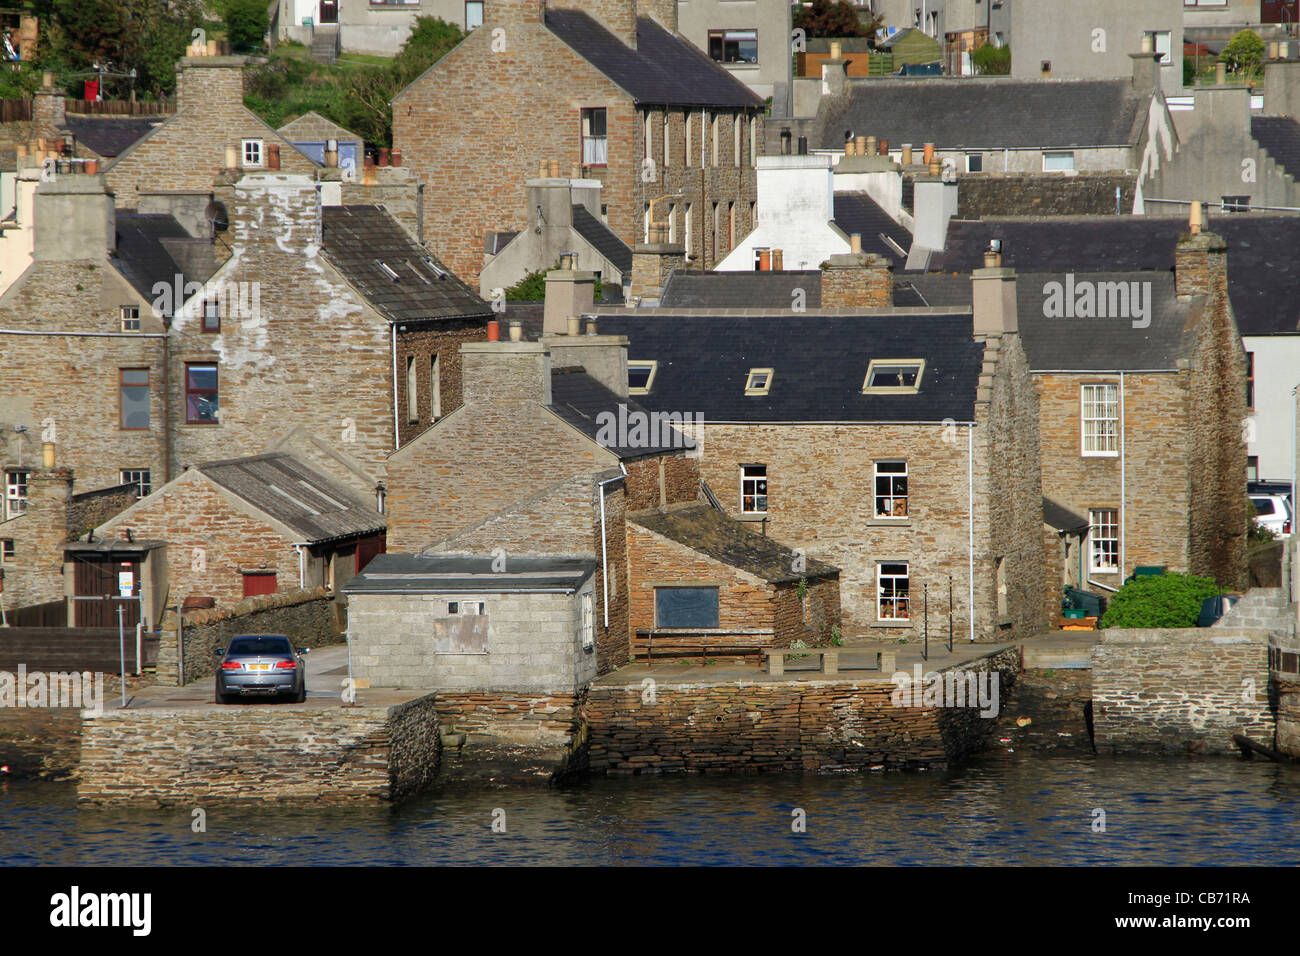 Stromness, Orkney waterfront Banque D'Images